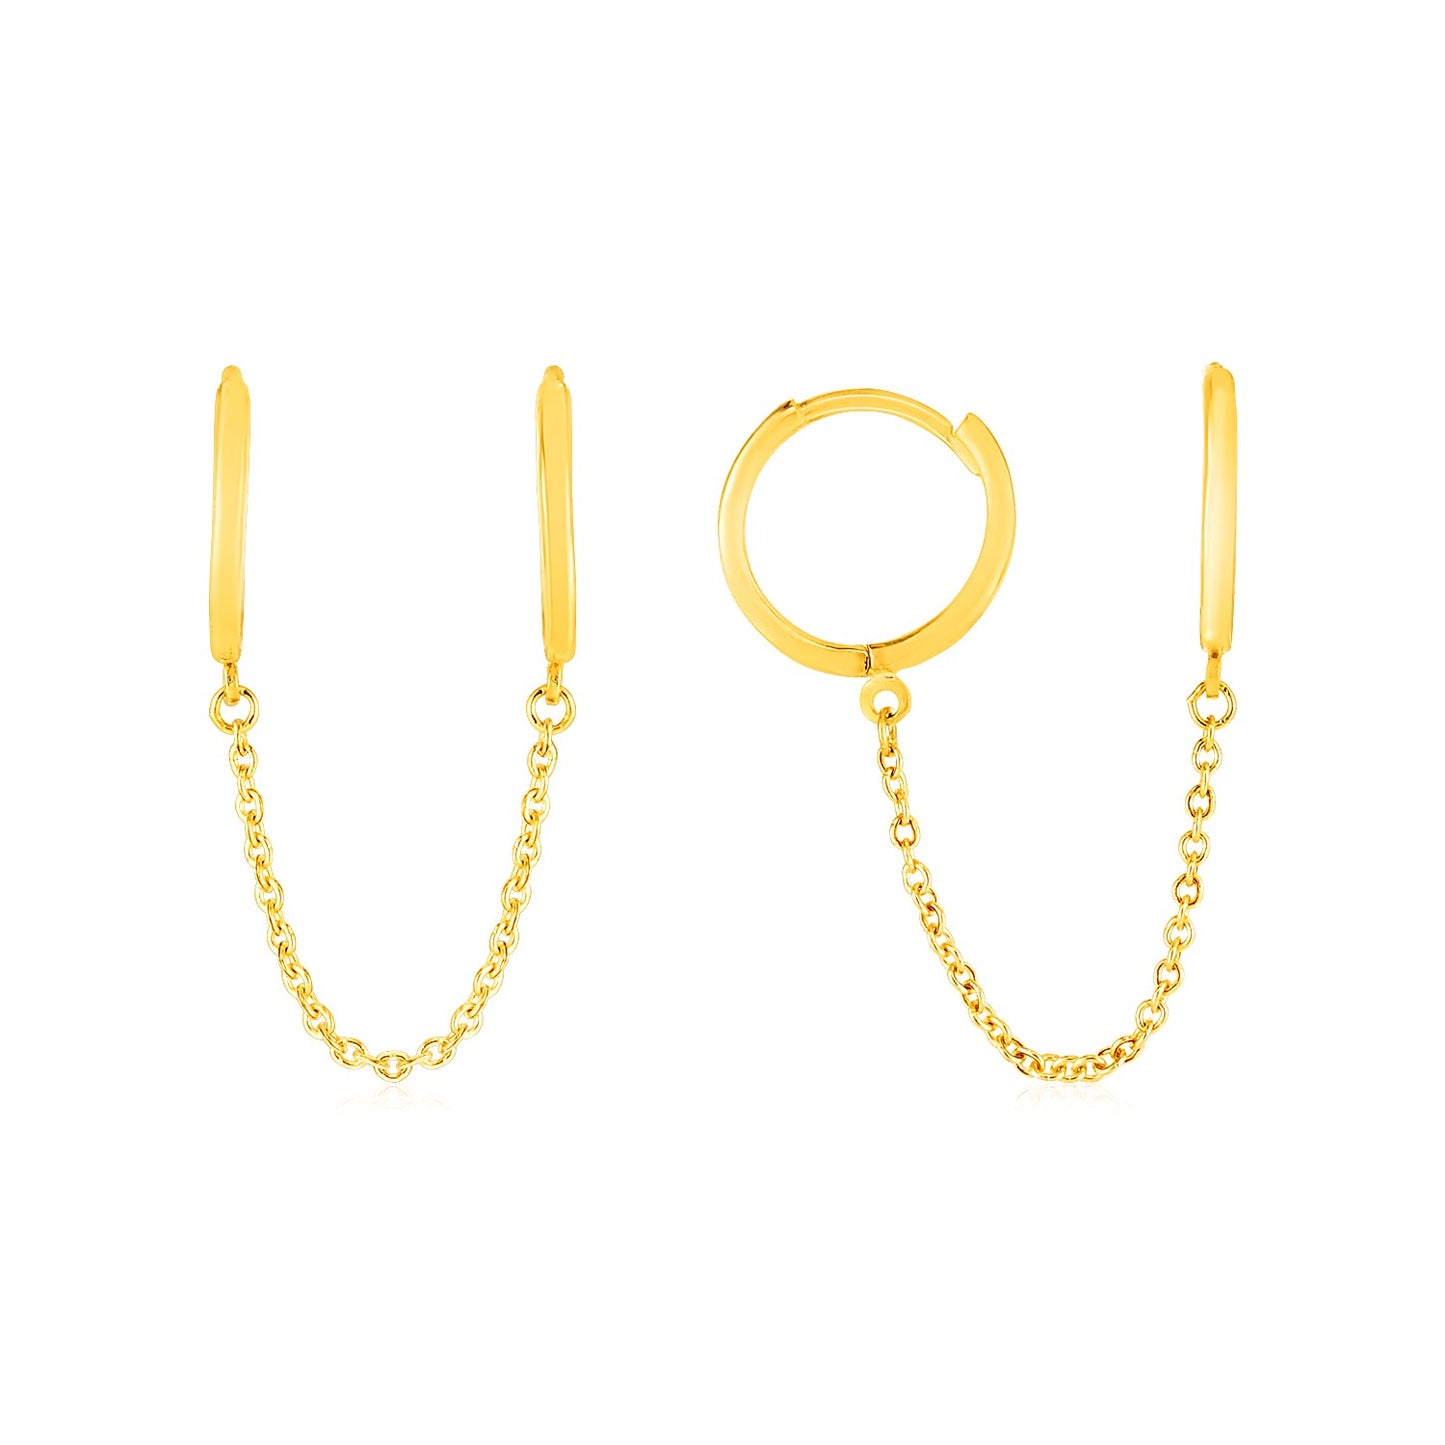 Chain Hoops in 14k Yellow Gold